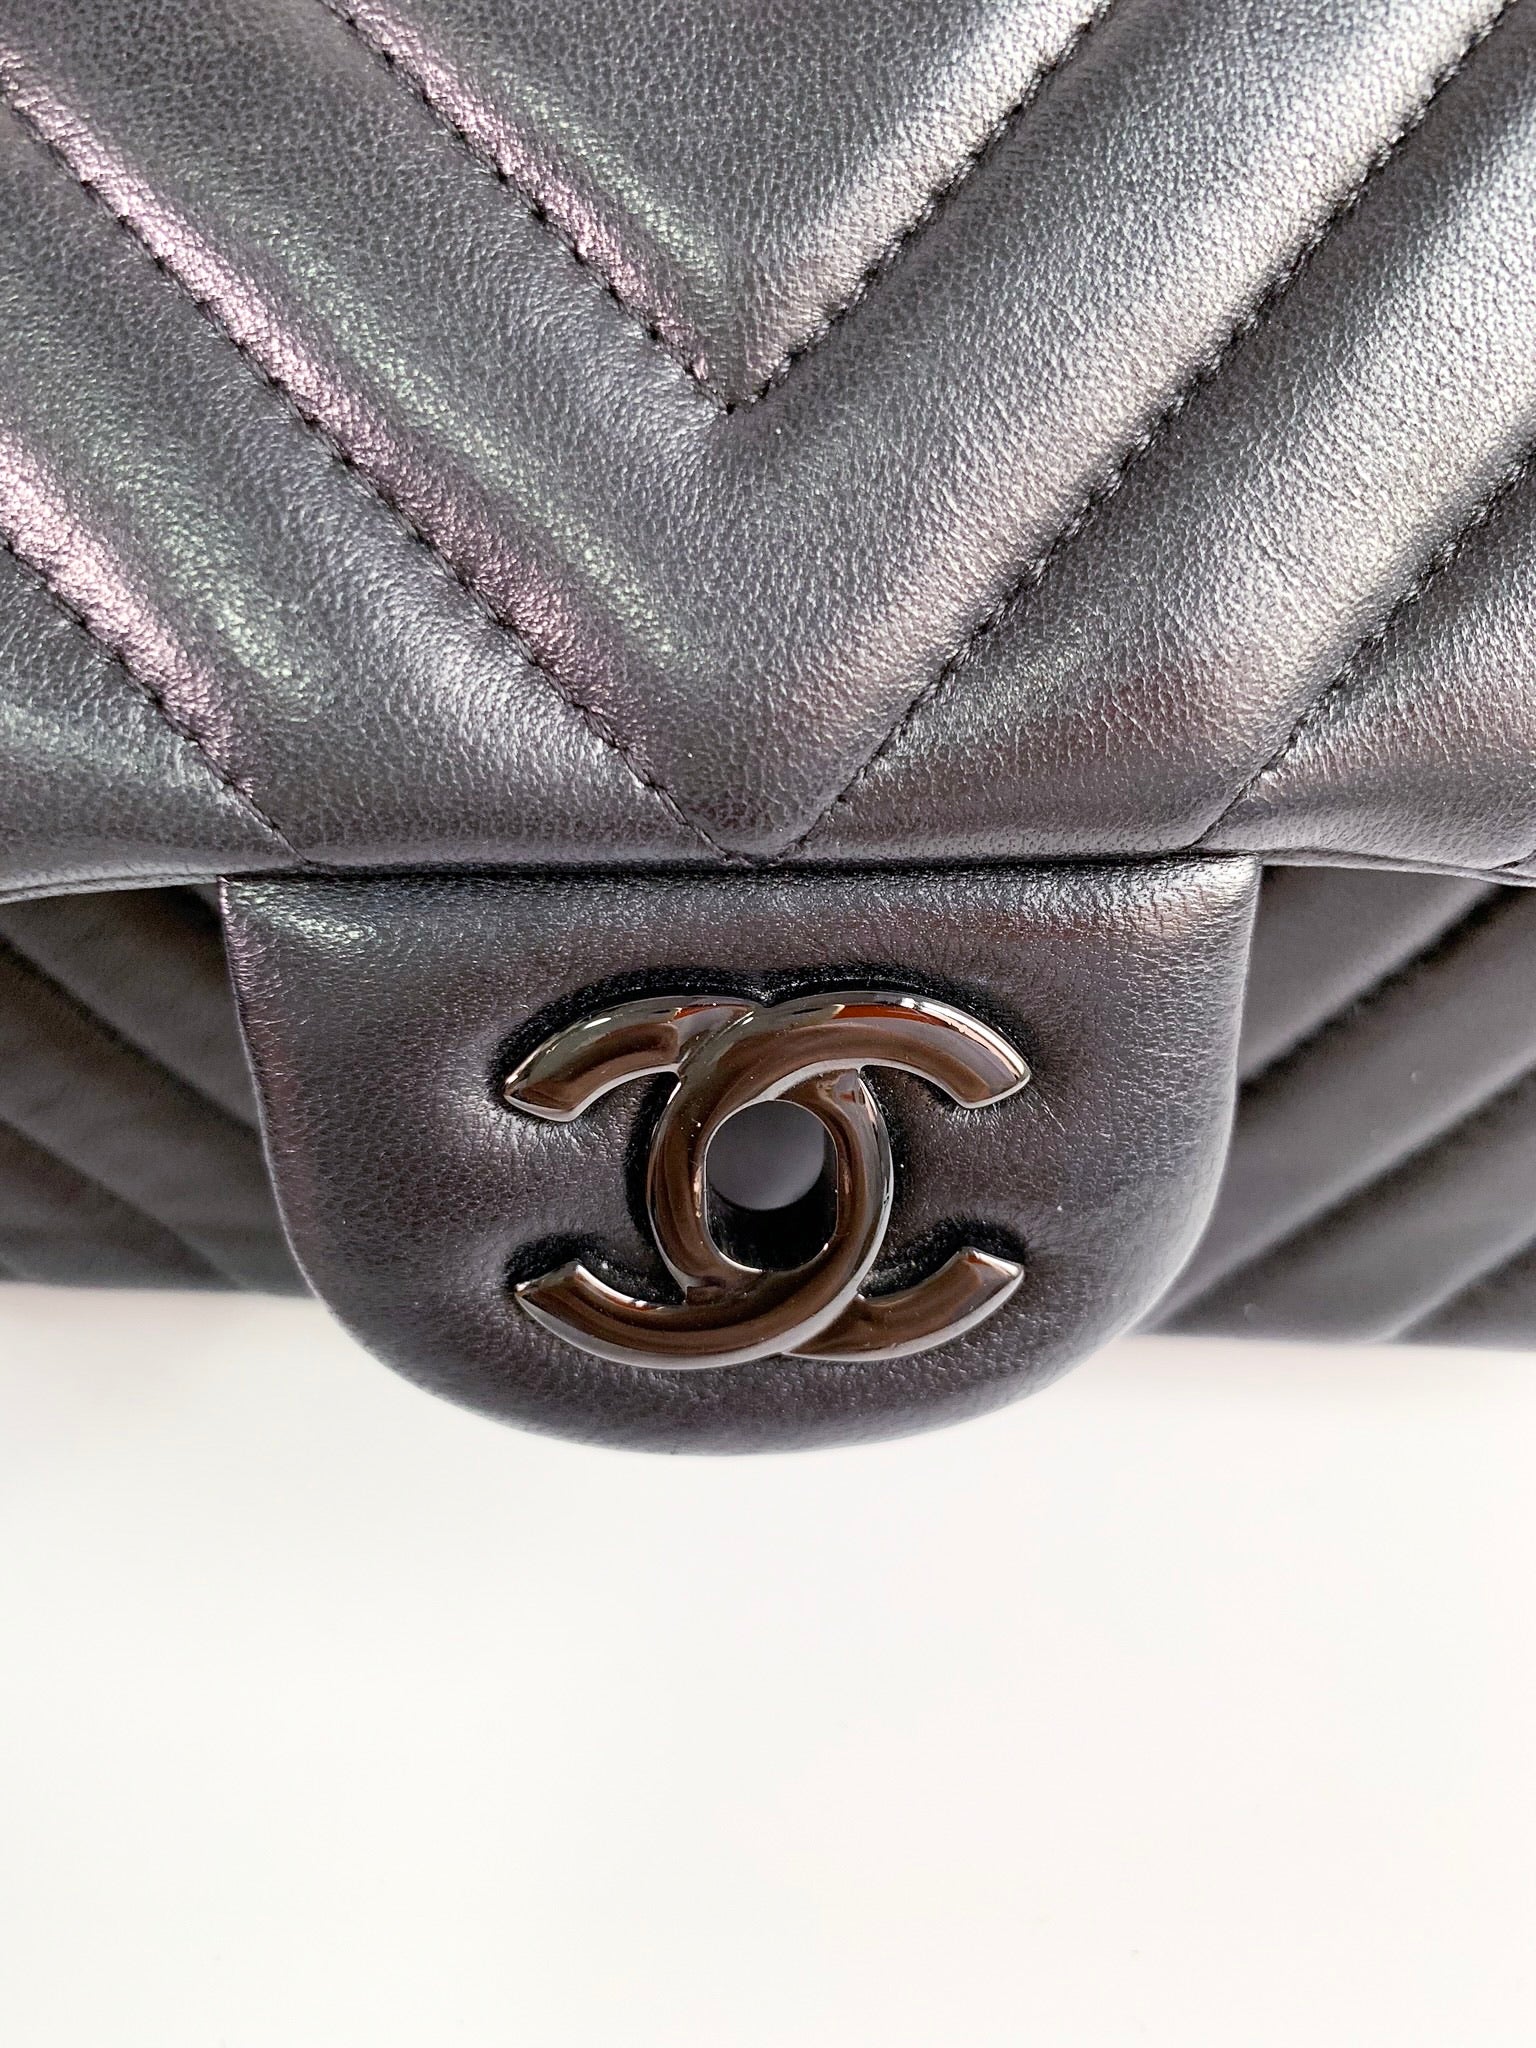 Chanel Chevron Quilted Rectangular Mini Flap Bag in Black Lambskin with  Shiny Silver Hardware - SOLD